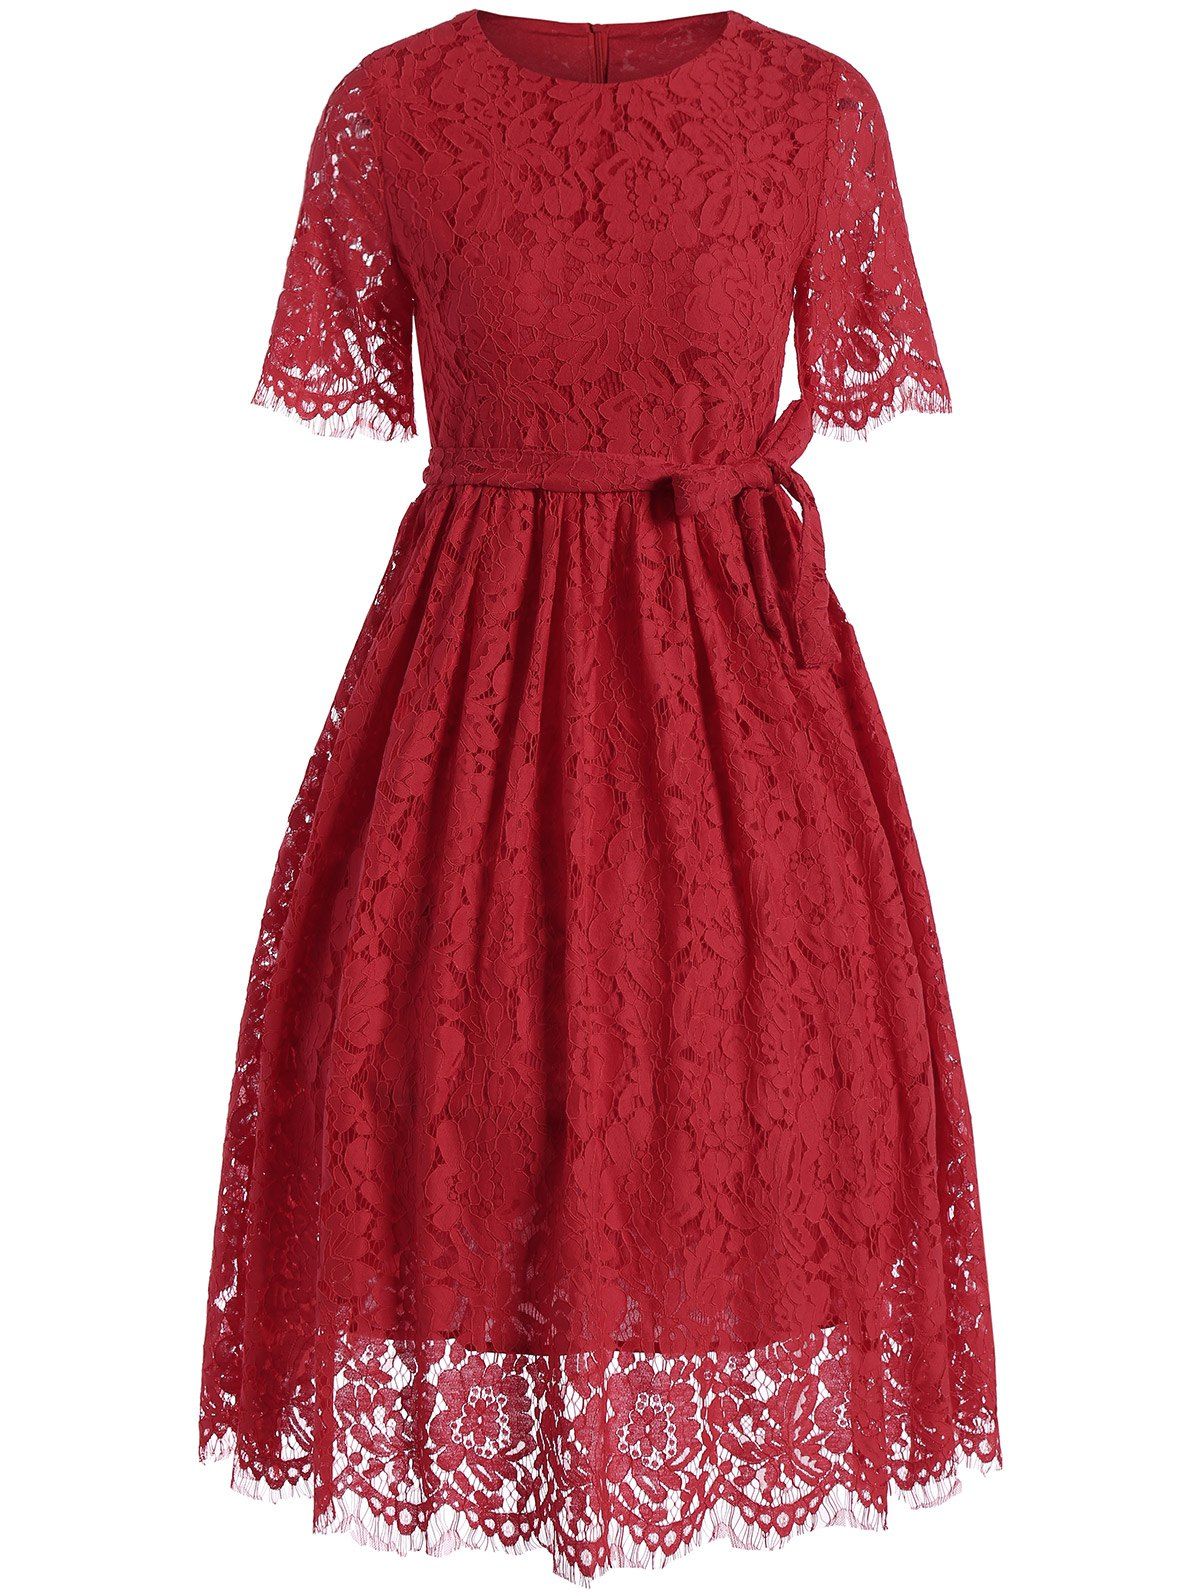 [26% OFF] Midi Lace A Line Dress With Belt | Rosegal